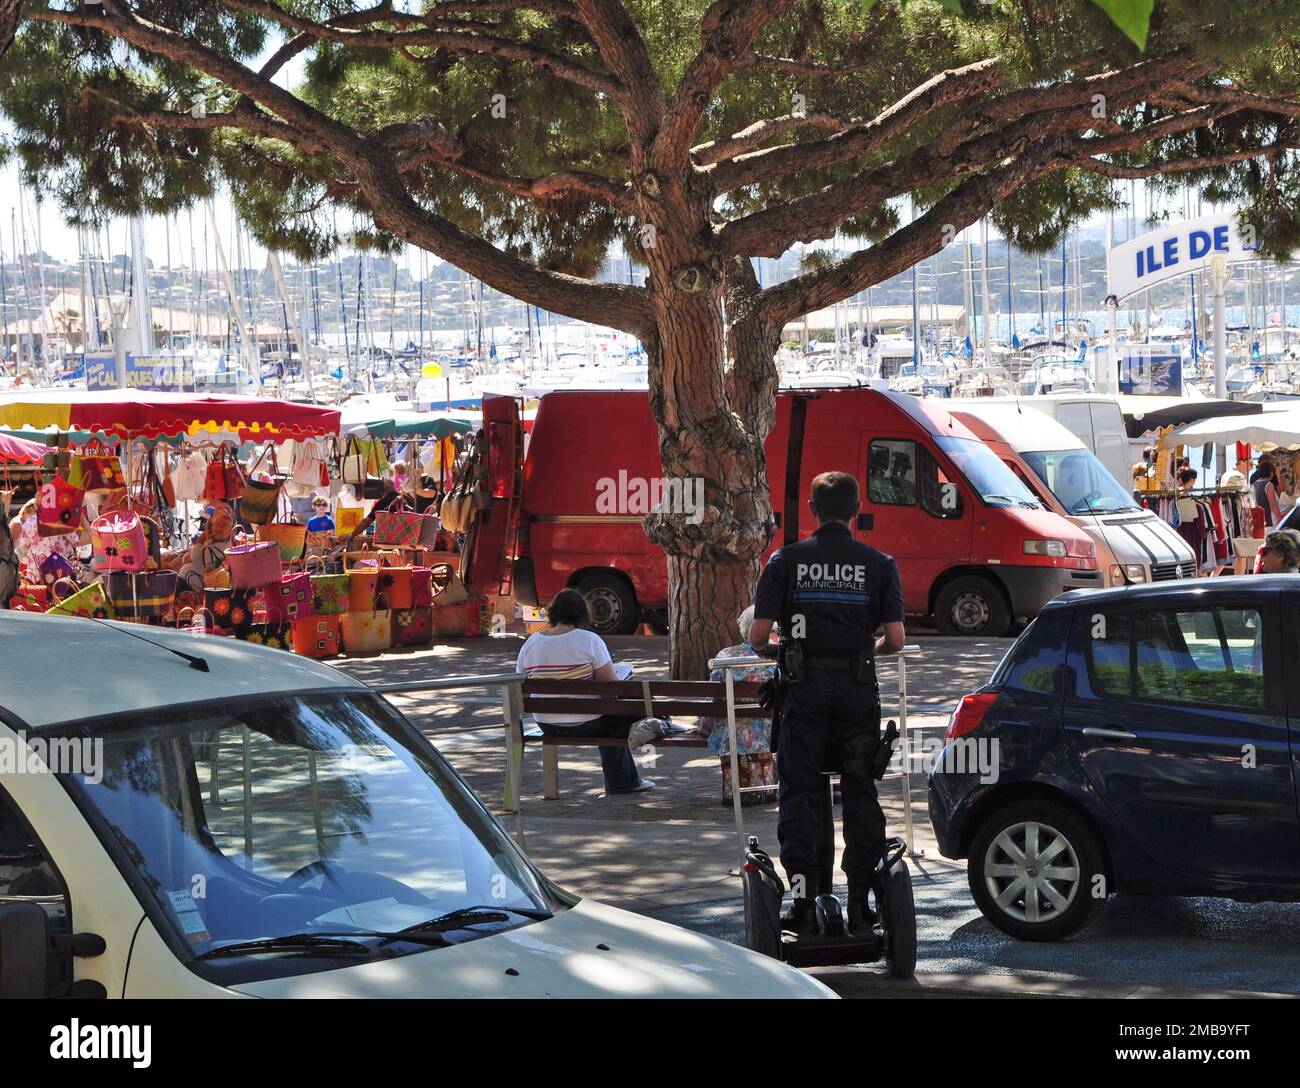 Municipal police of Bandol in electric scooters Stock Photo - Alamy